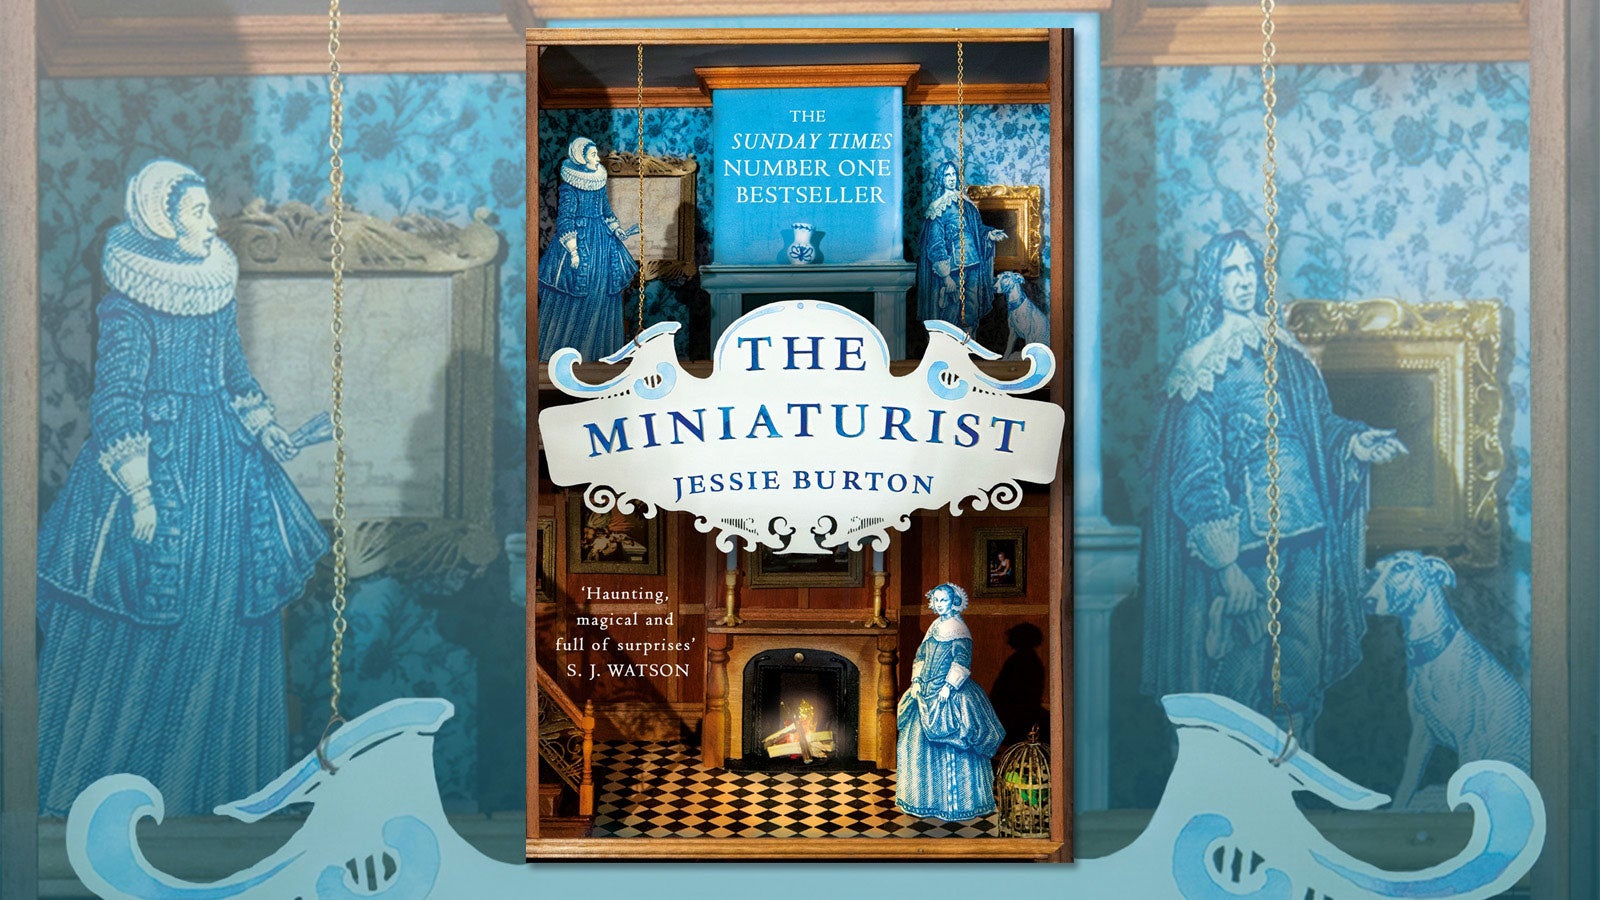 The Miniaturist book cover set against the background of a miniature room